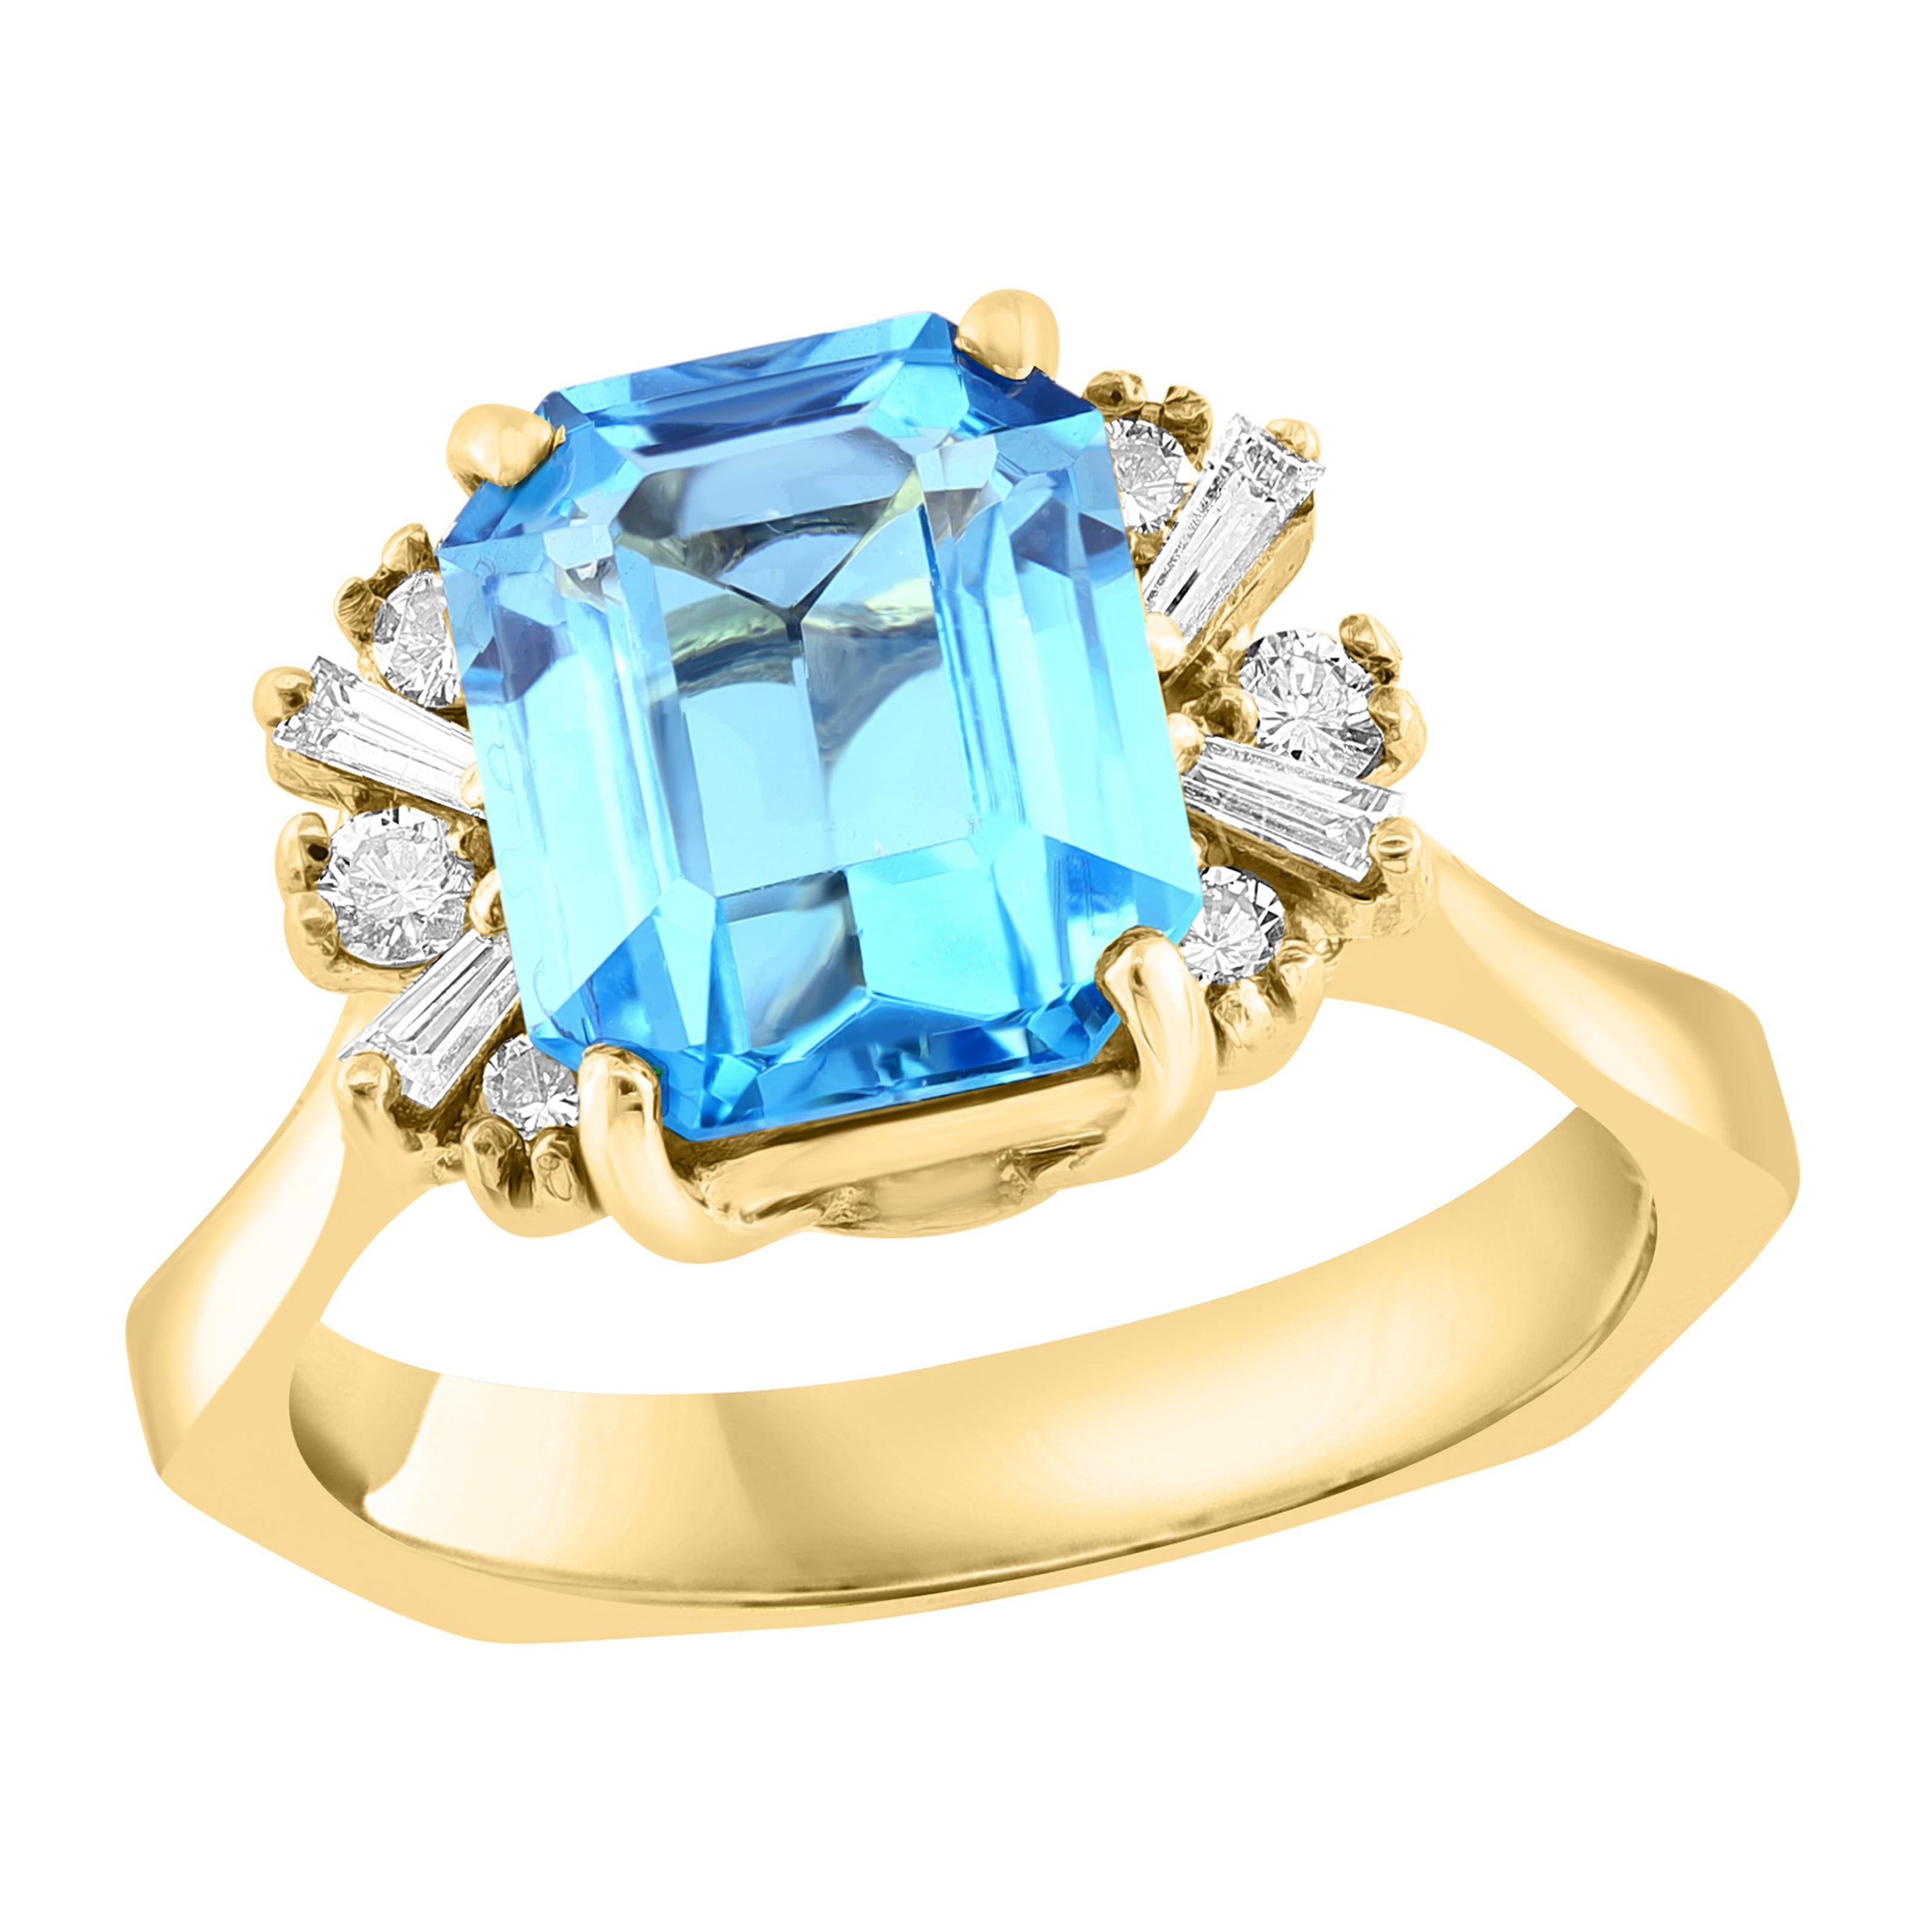 3.98 Carat Emerald Cut Blue Topaz and Diamond Ring in 14K Yellow Gold For Sale